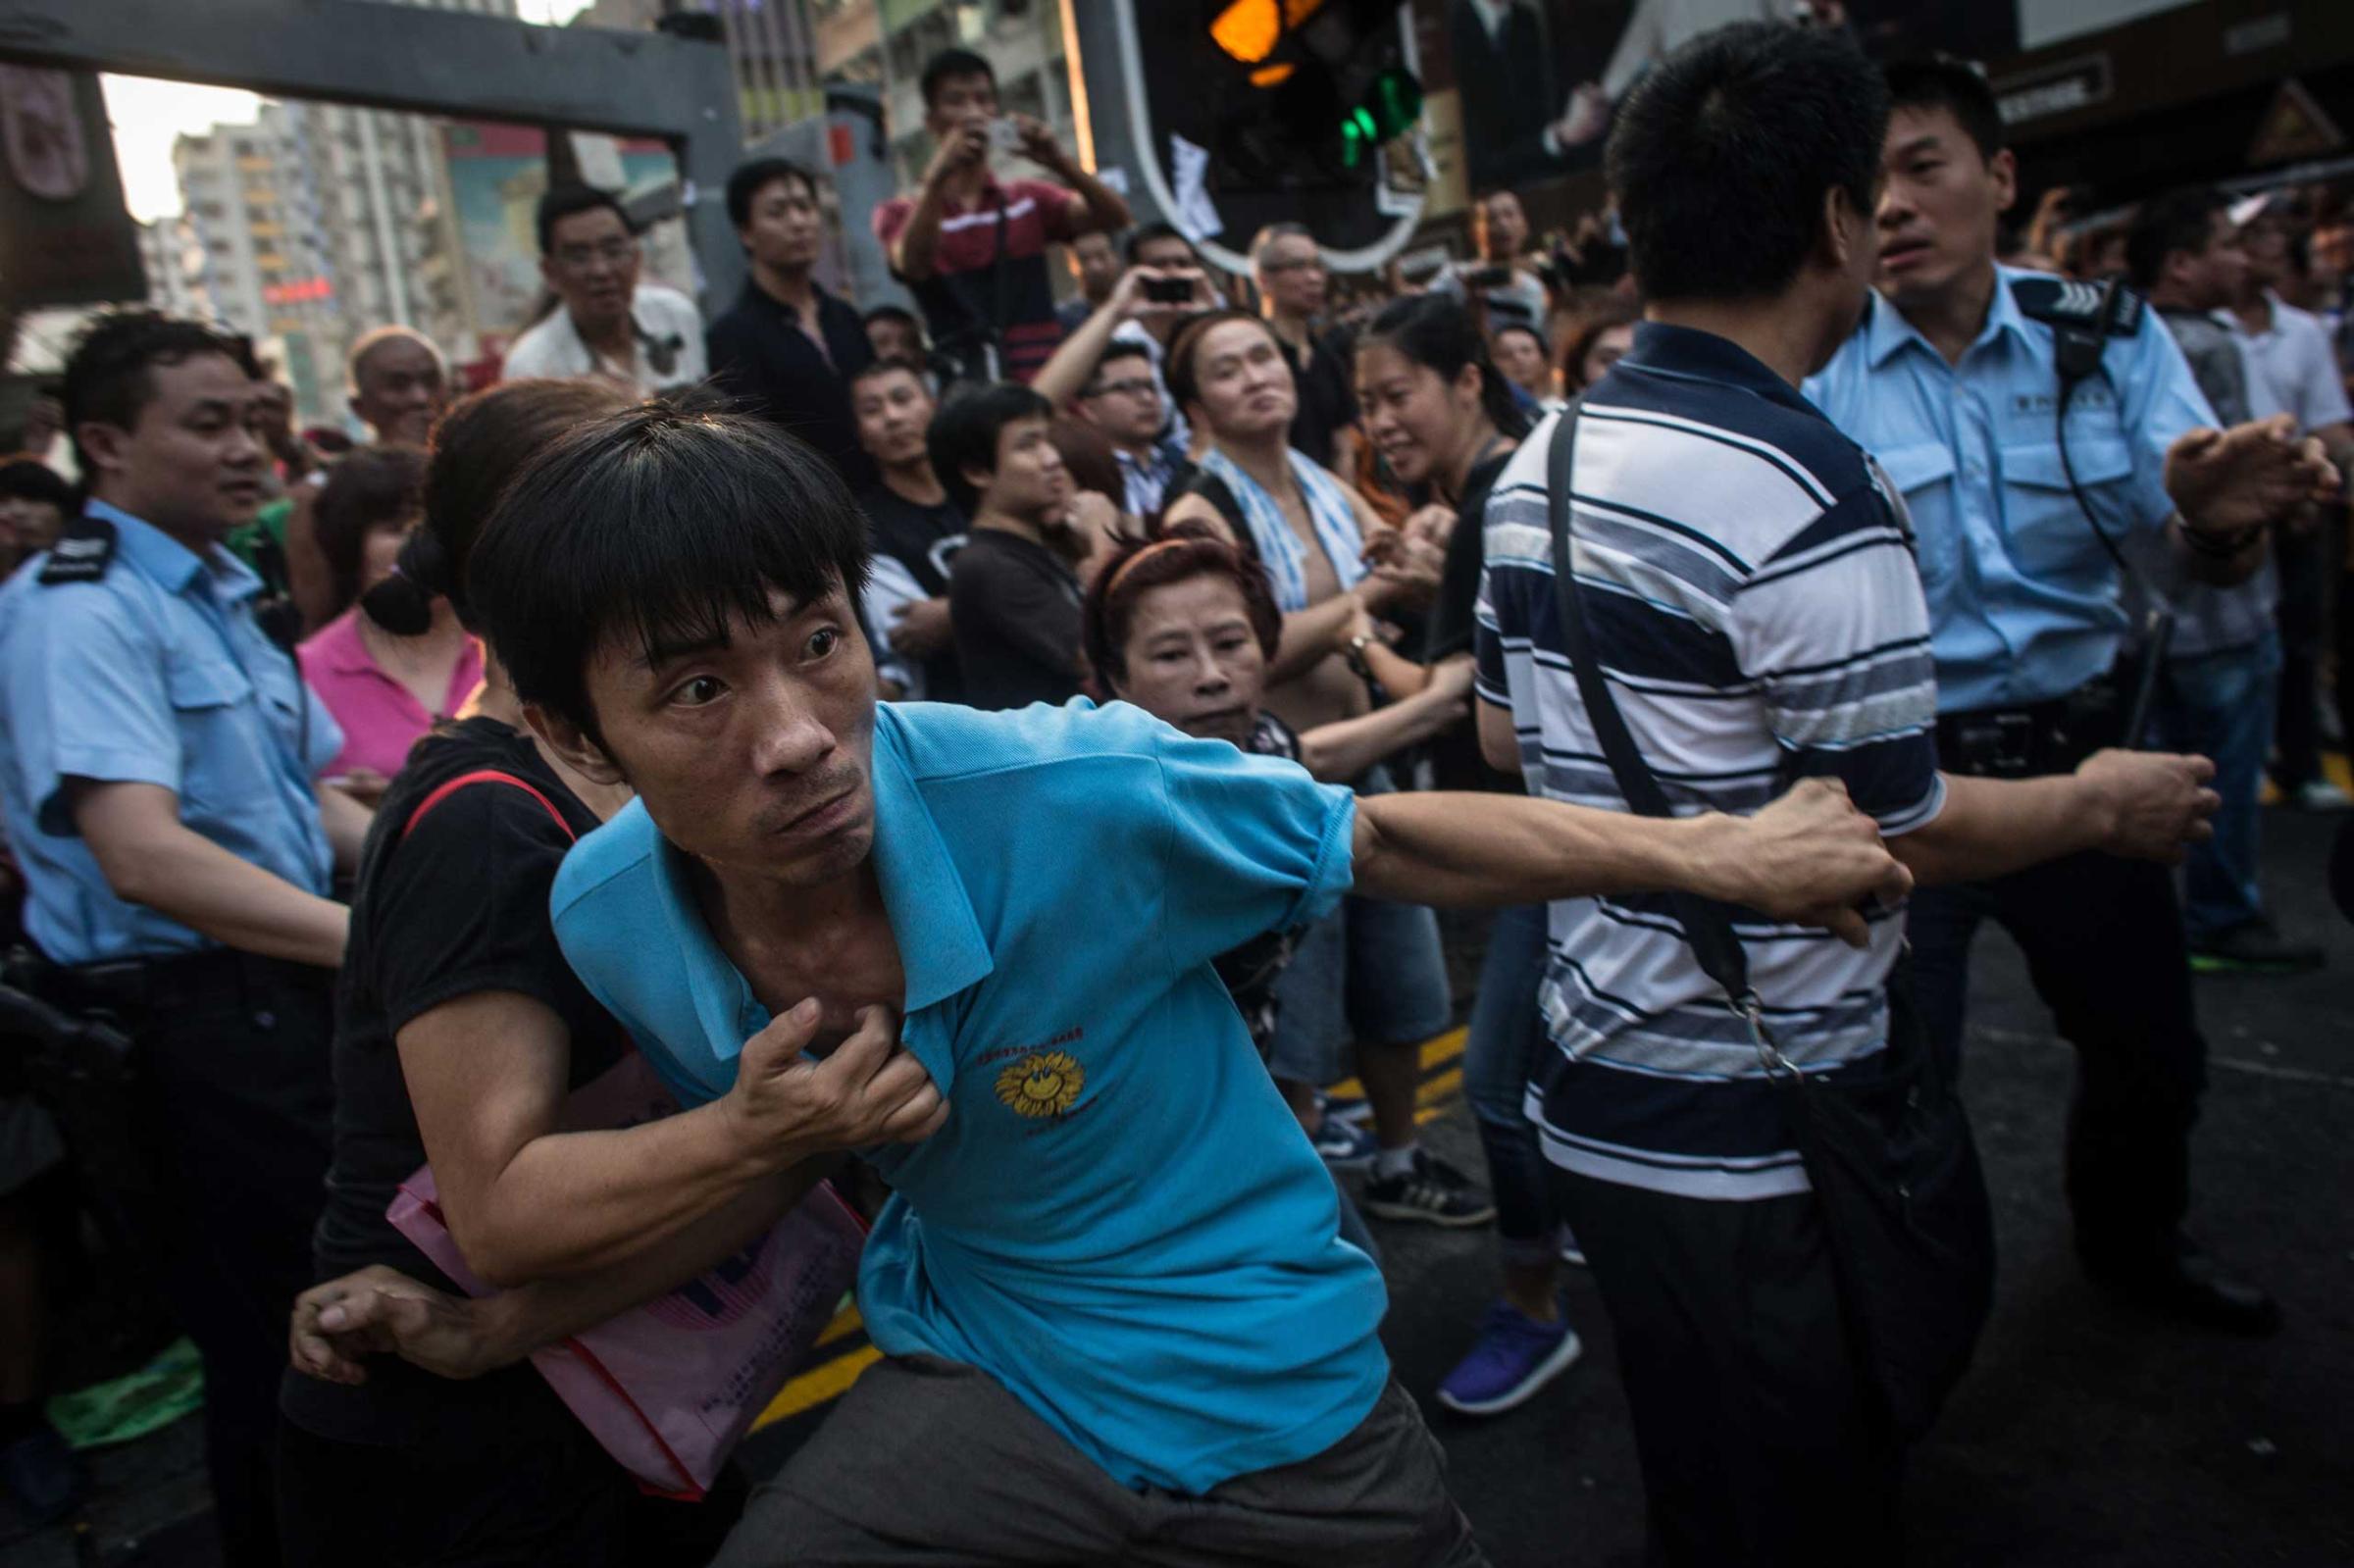 A local resident breaks through police lines and attempts to reach the pro-democracy tent on Oct. 3, 2014 in Mong Kok, Hong Kong.